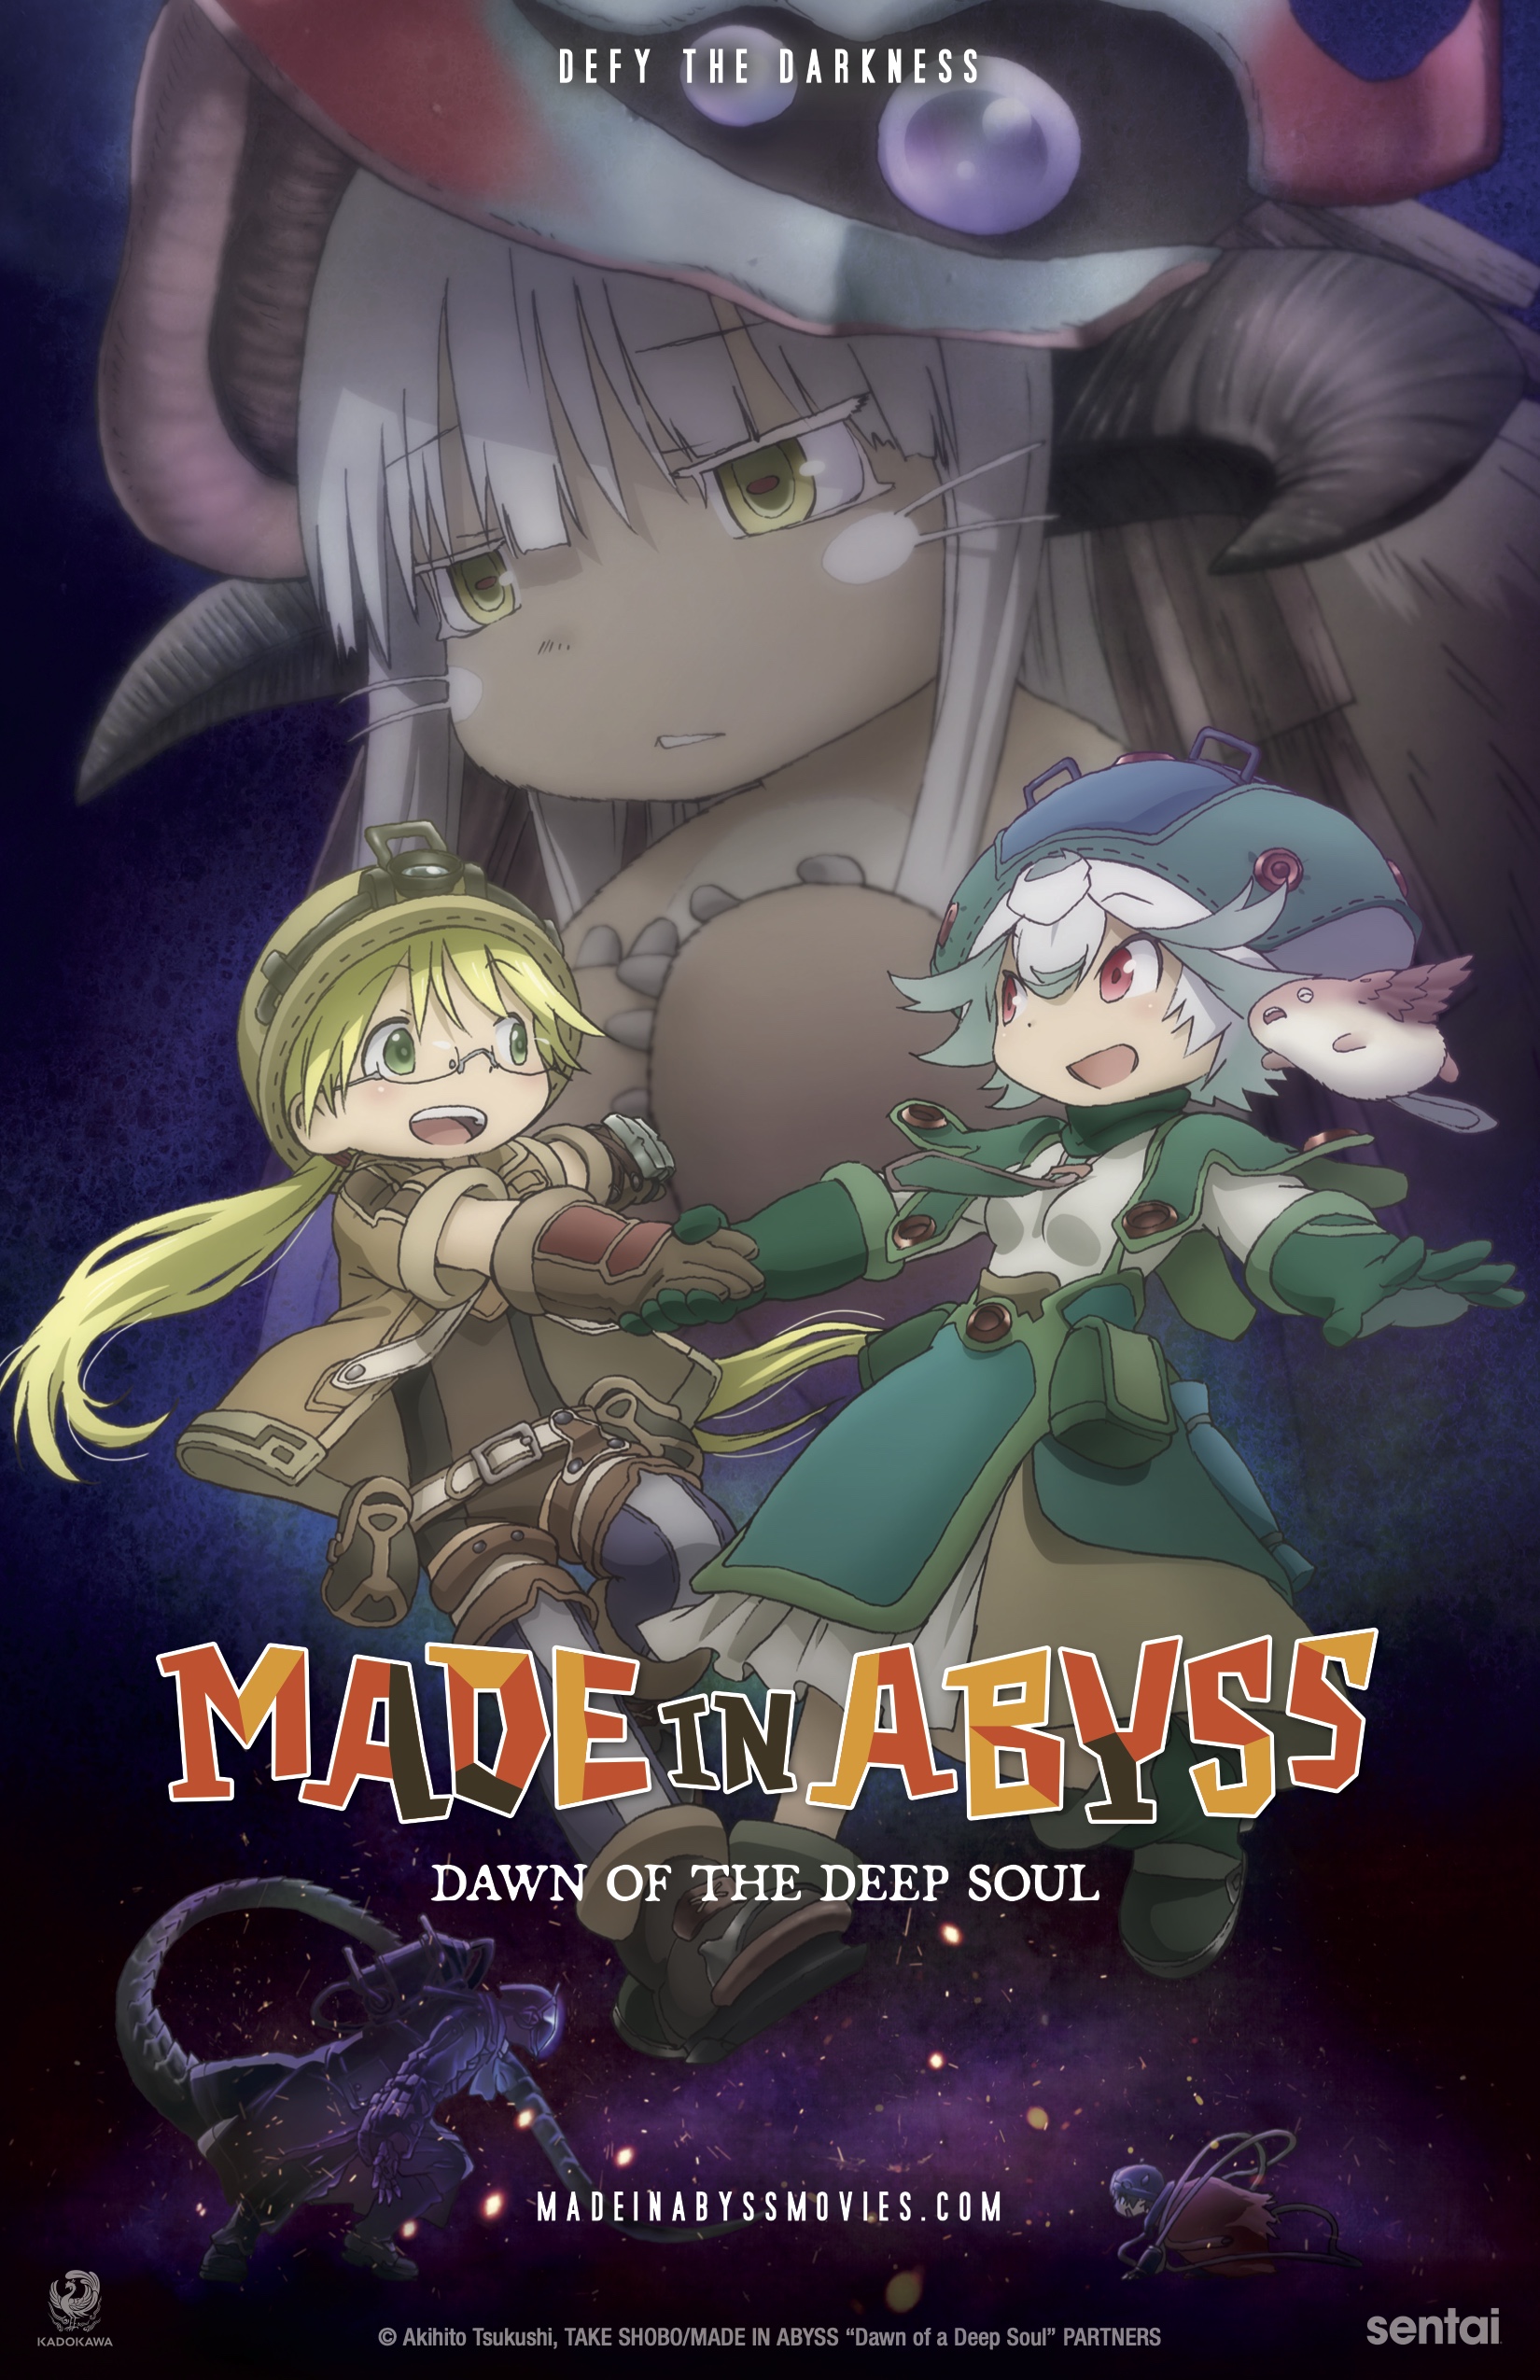 Made in Abyss Movie 2: Wandering Twilight (2019) - Filmaffinity